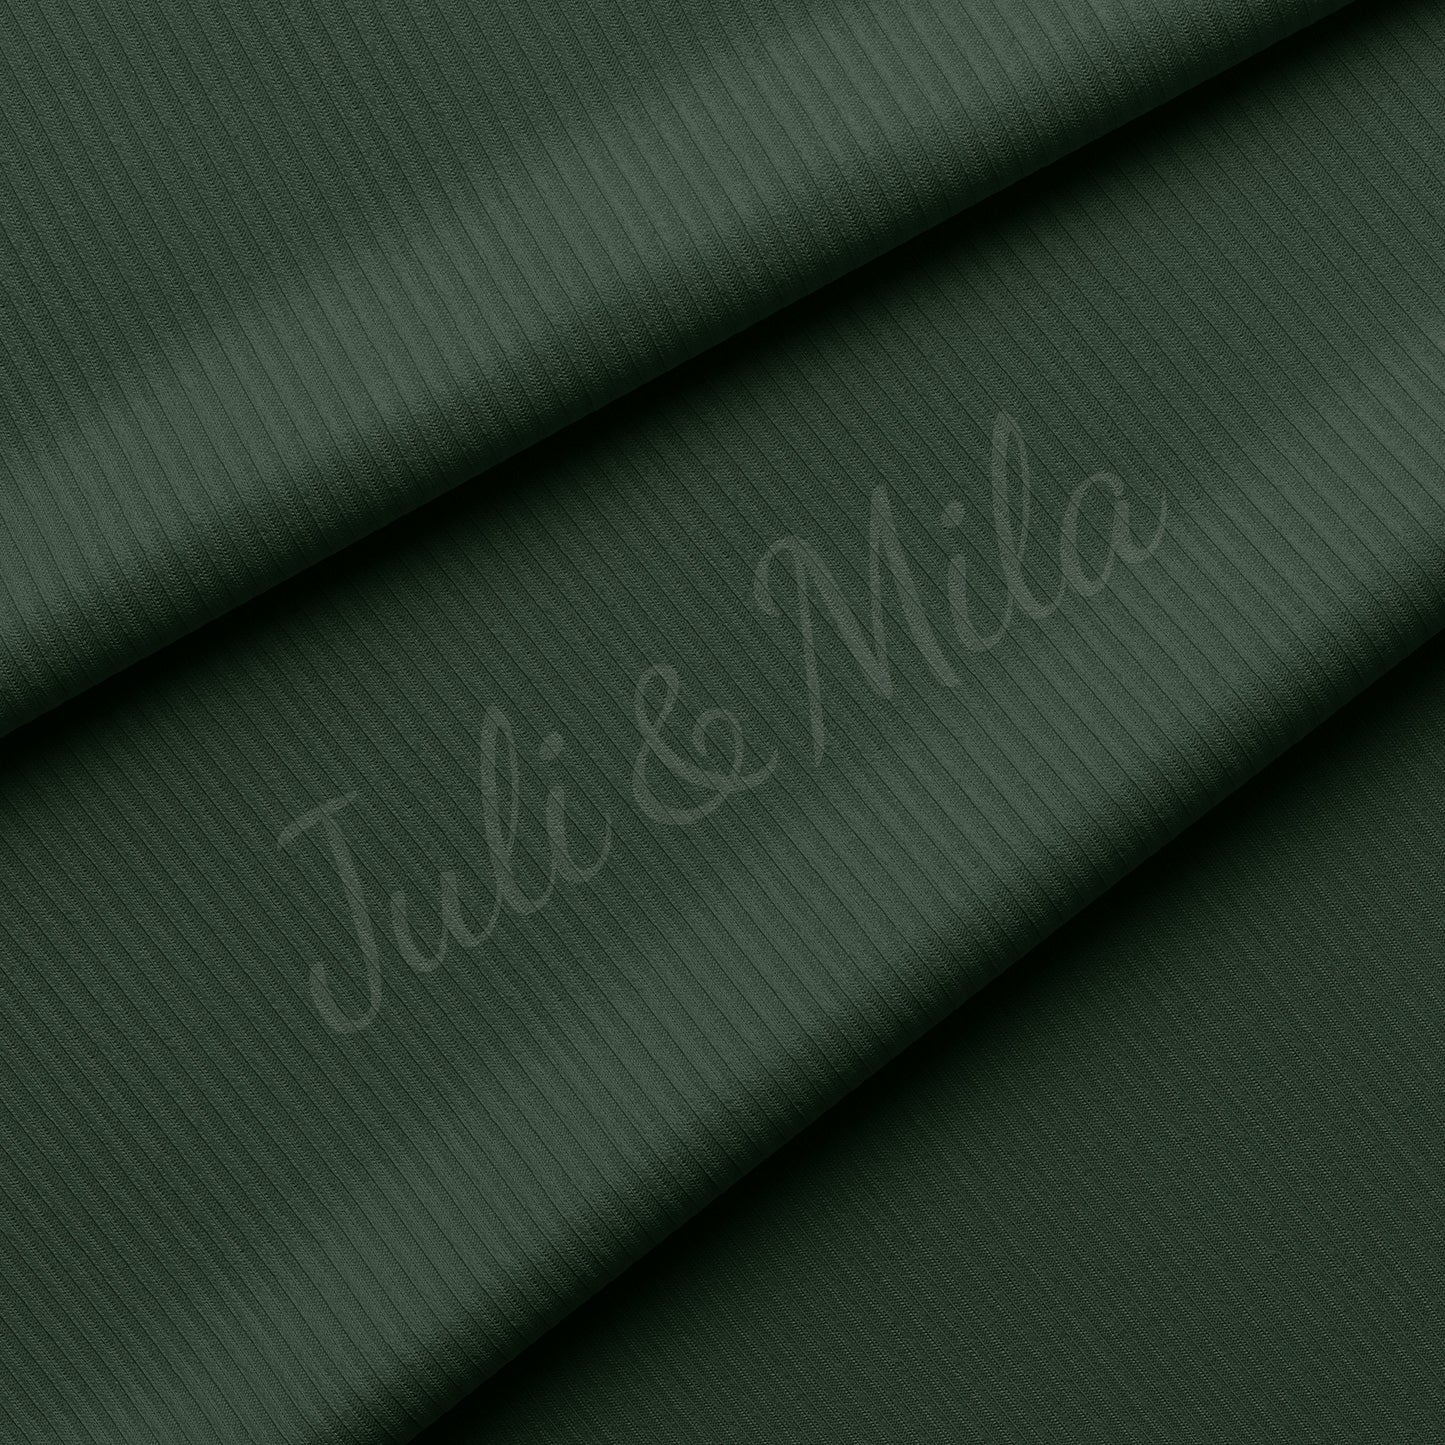 Army green  Rib Knit Fabric by the Yard Ribbed Jersey Stretchy Soft Polyester Stretch Fabric 1 Yard